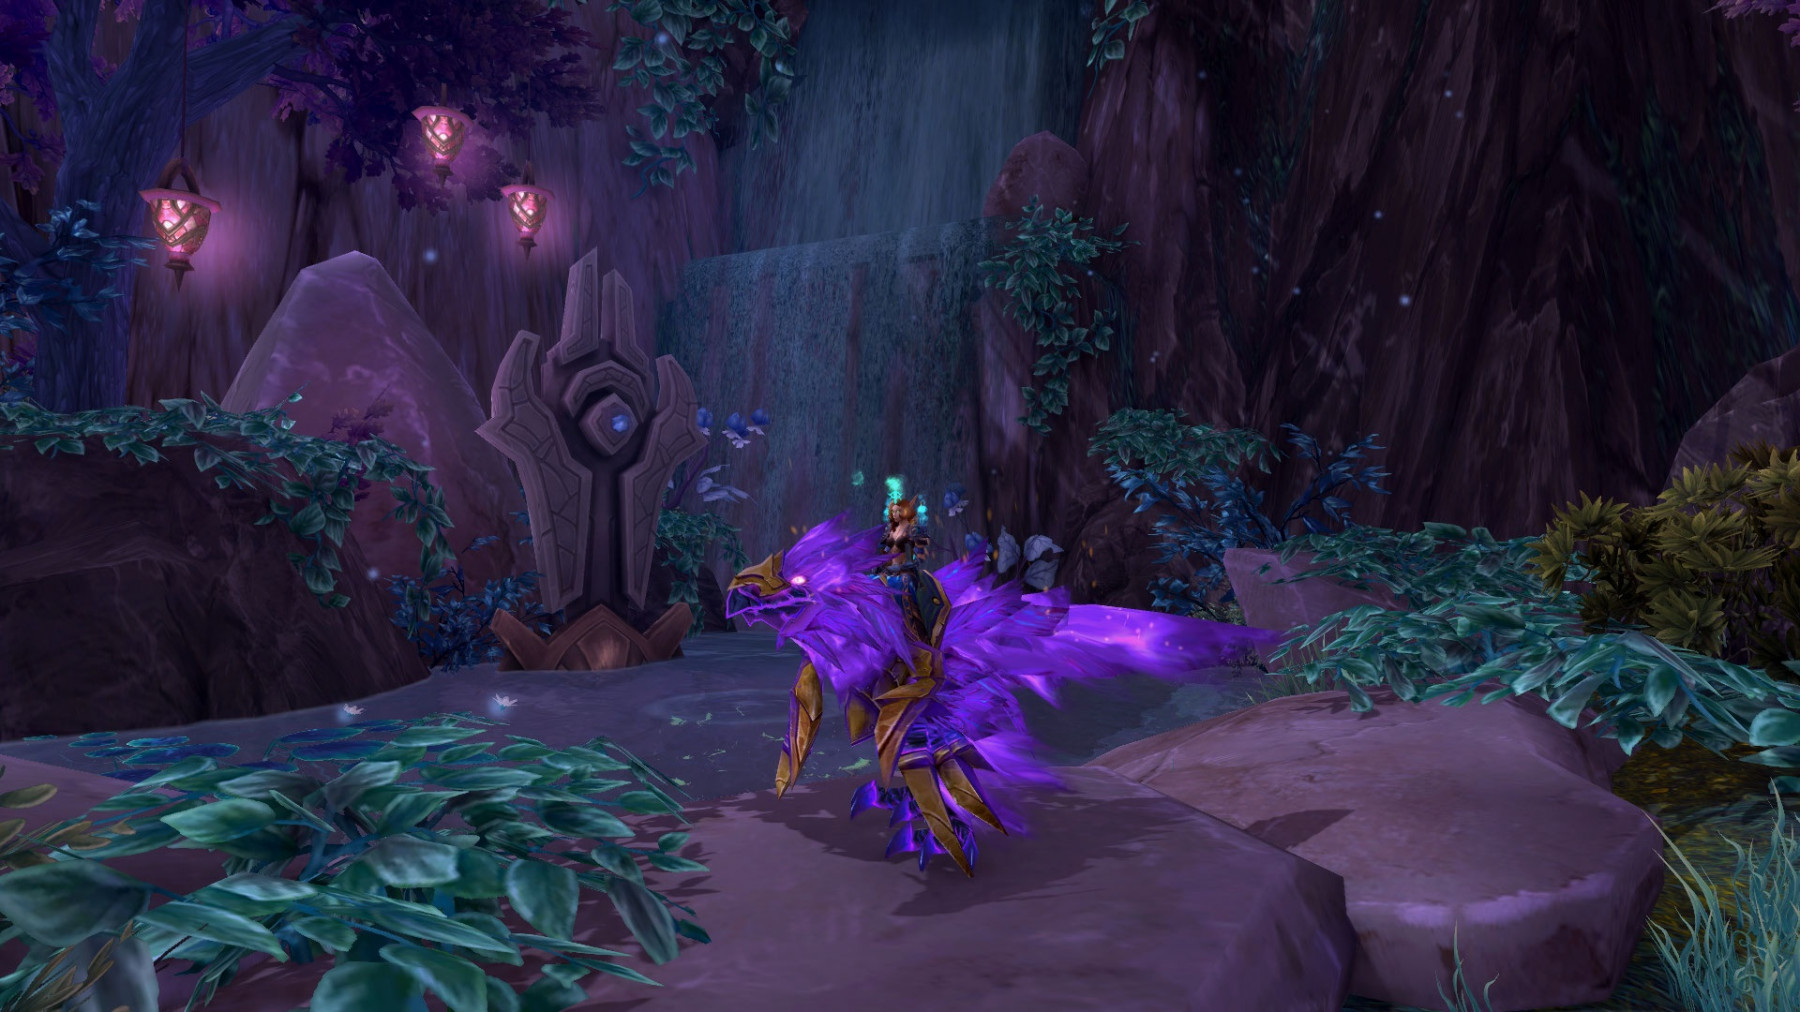 Call Of The Void A Voidtalon Guide Guides Wowhead